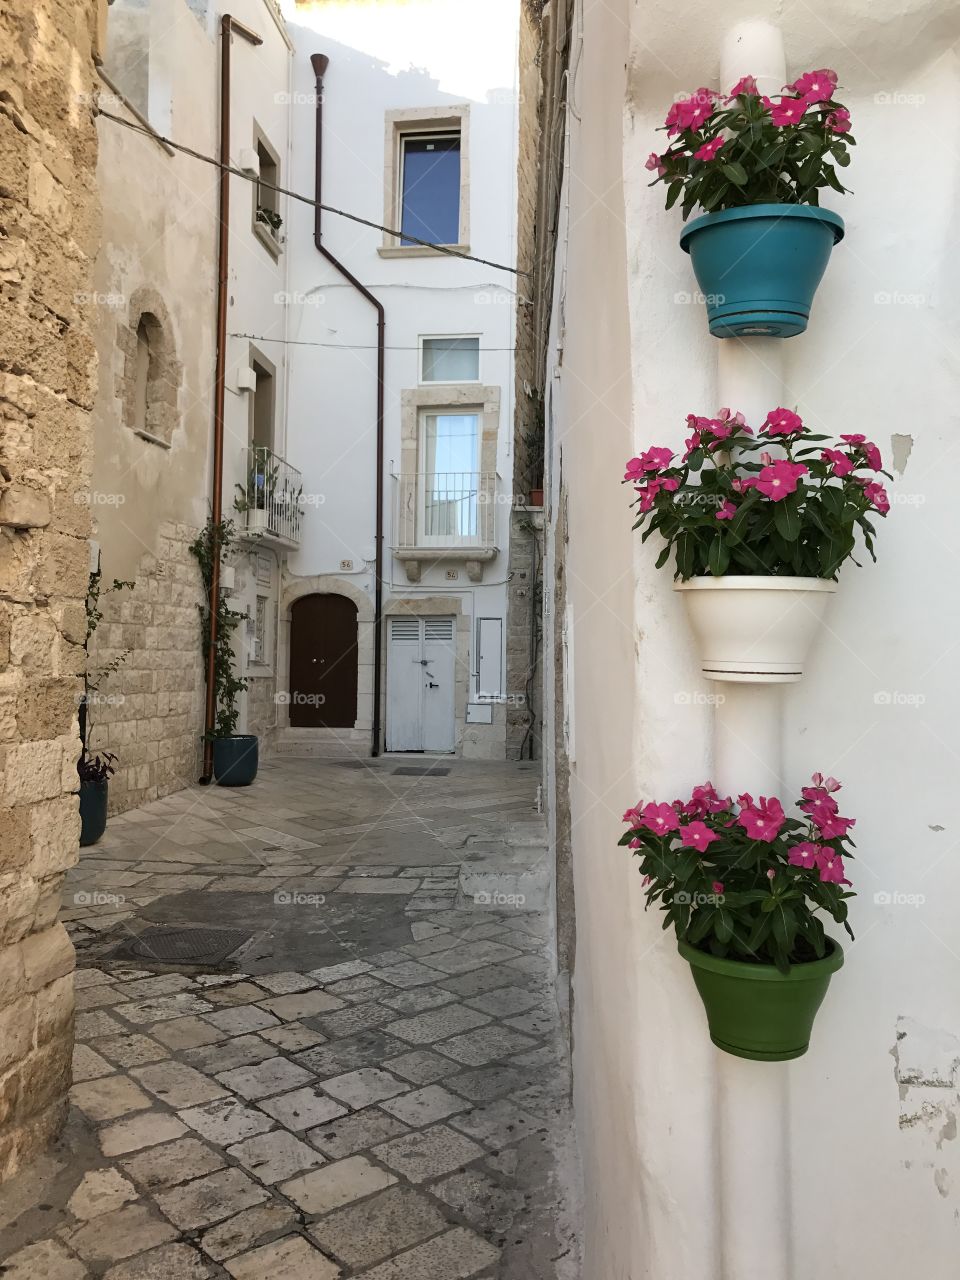 Cityscape with flowers, Polignano a Mare, Italy